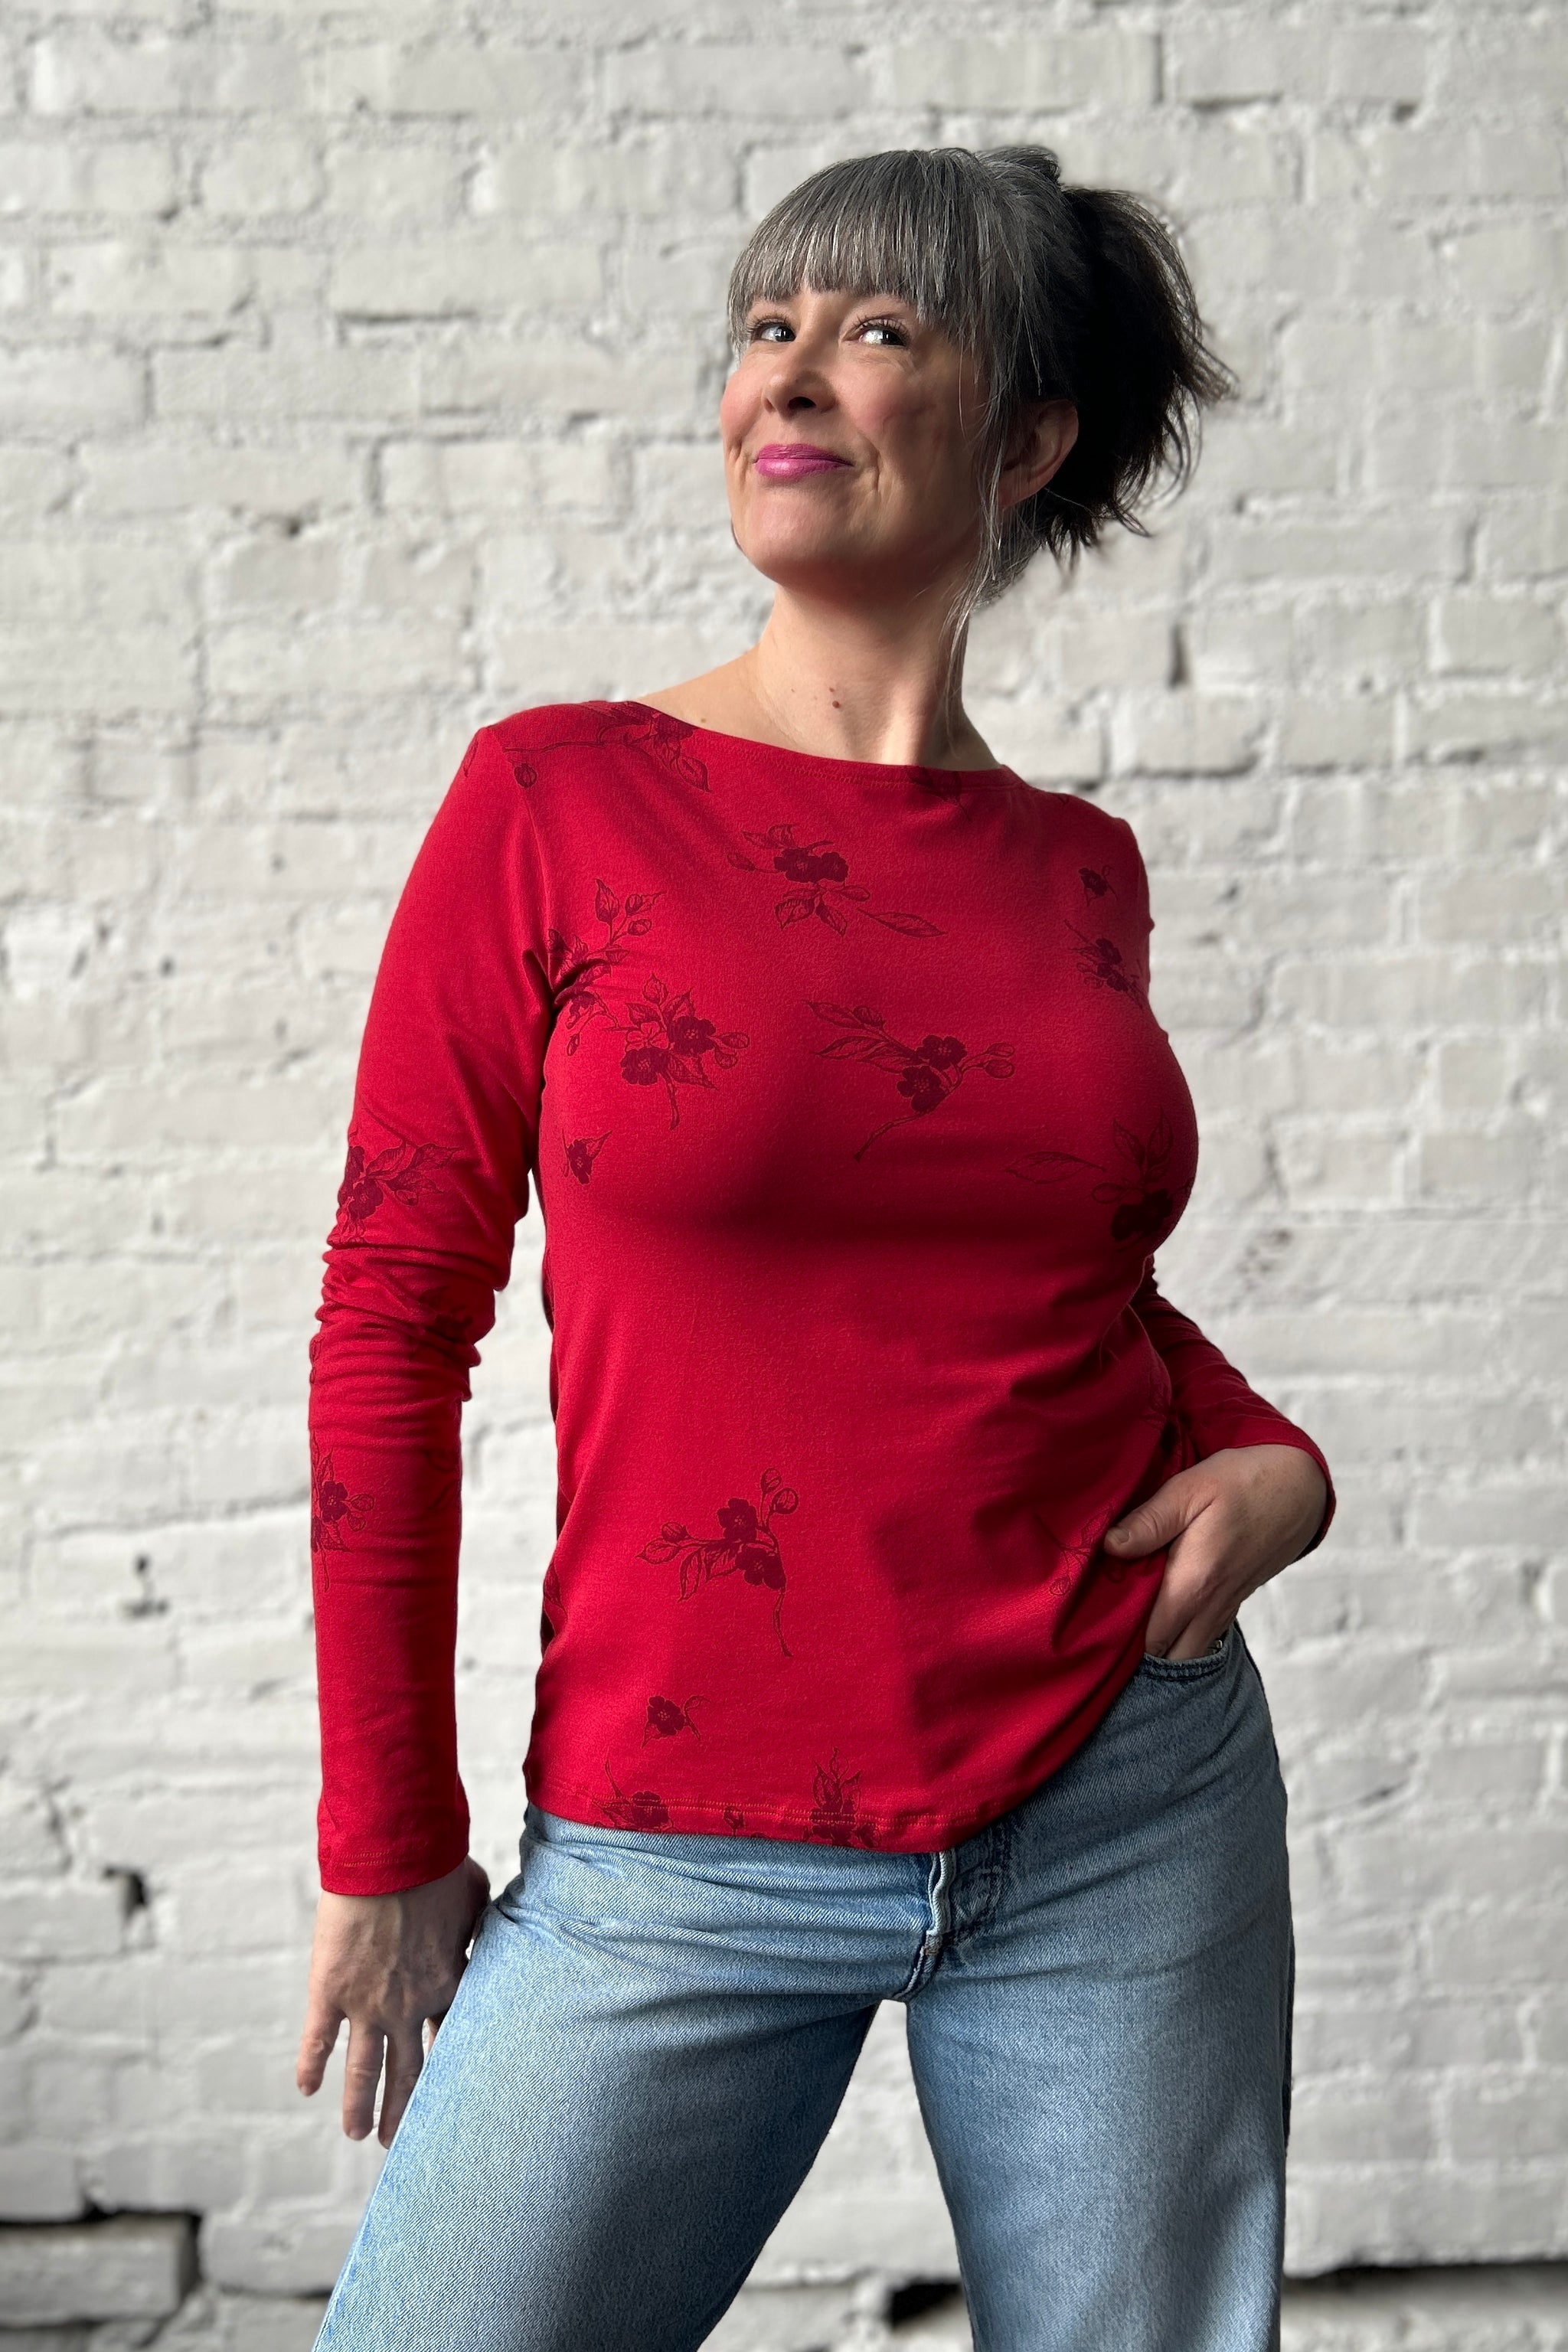 Woman poses with hand in jeans pocket, wearing a long sleeve red tee with boatneck. Shirt features apple blossom repeat print in dark red ink.